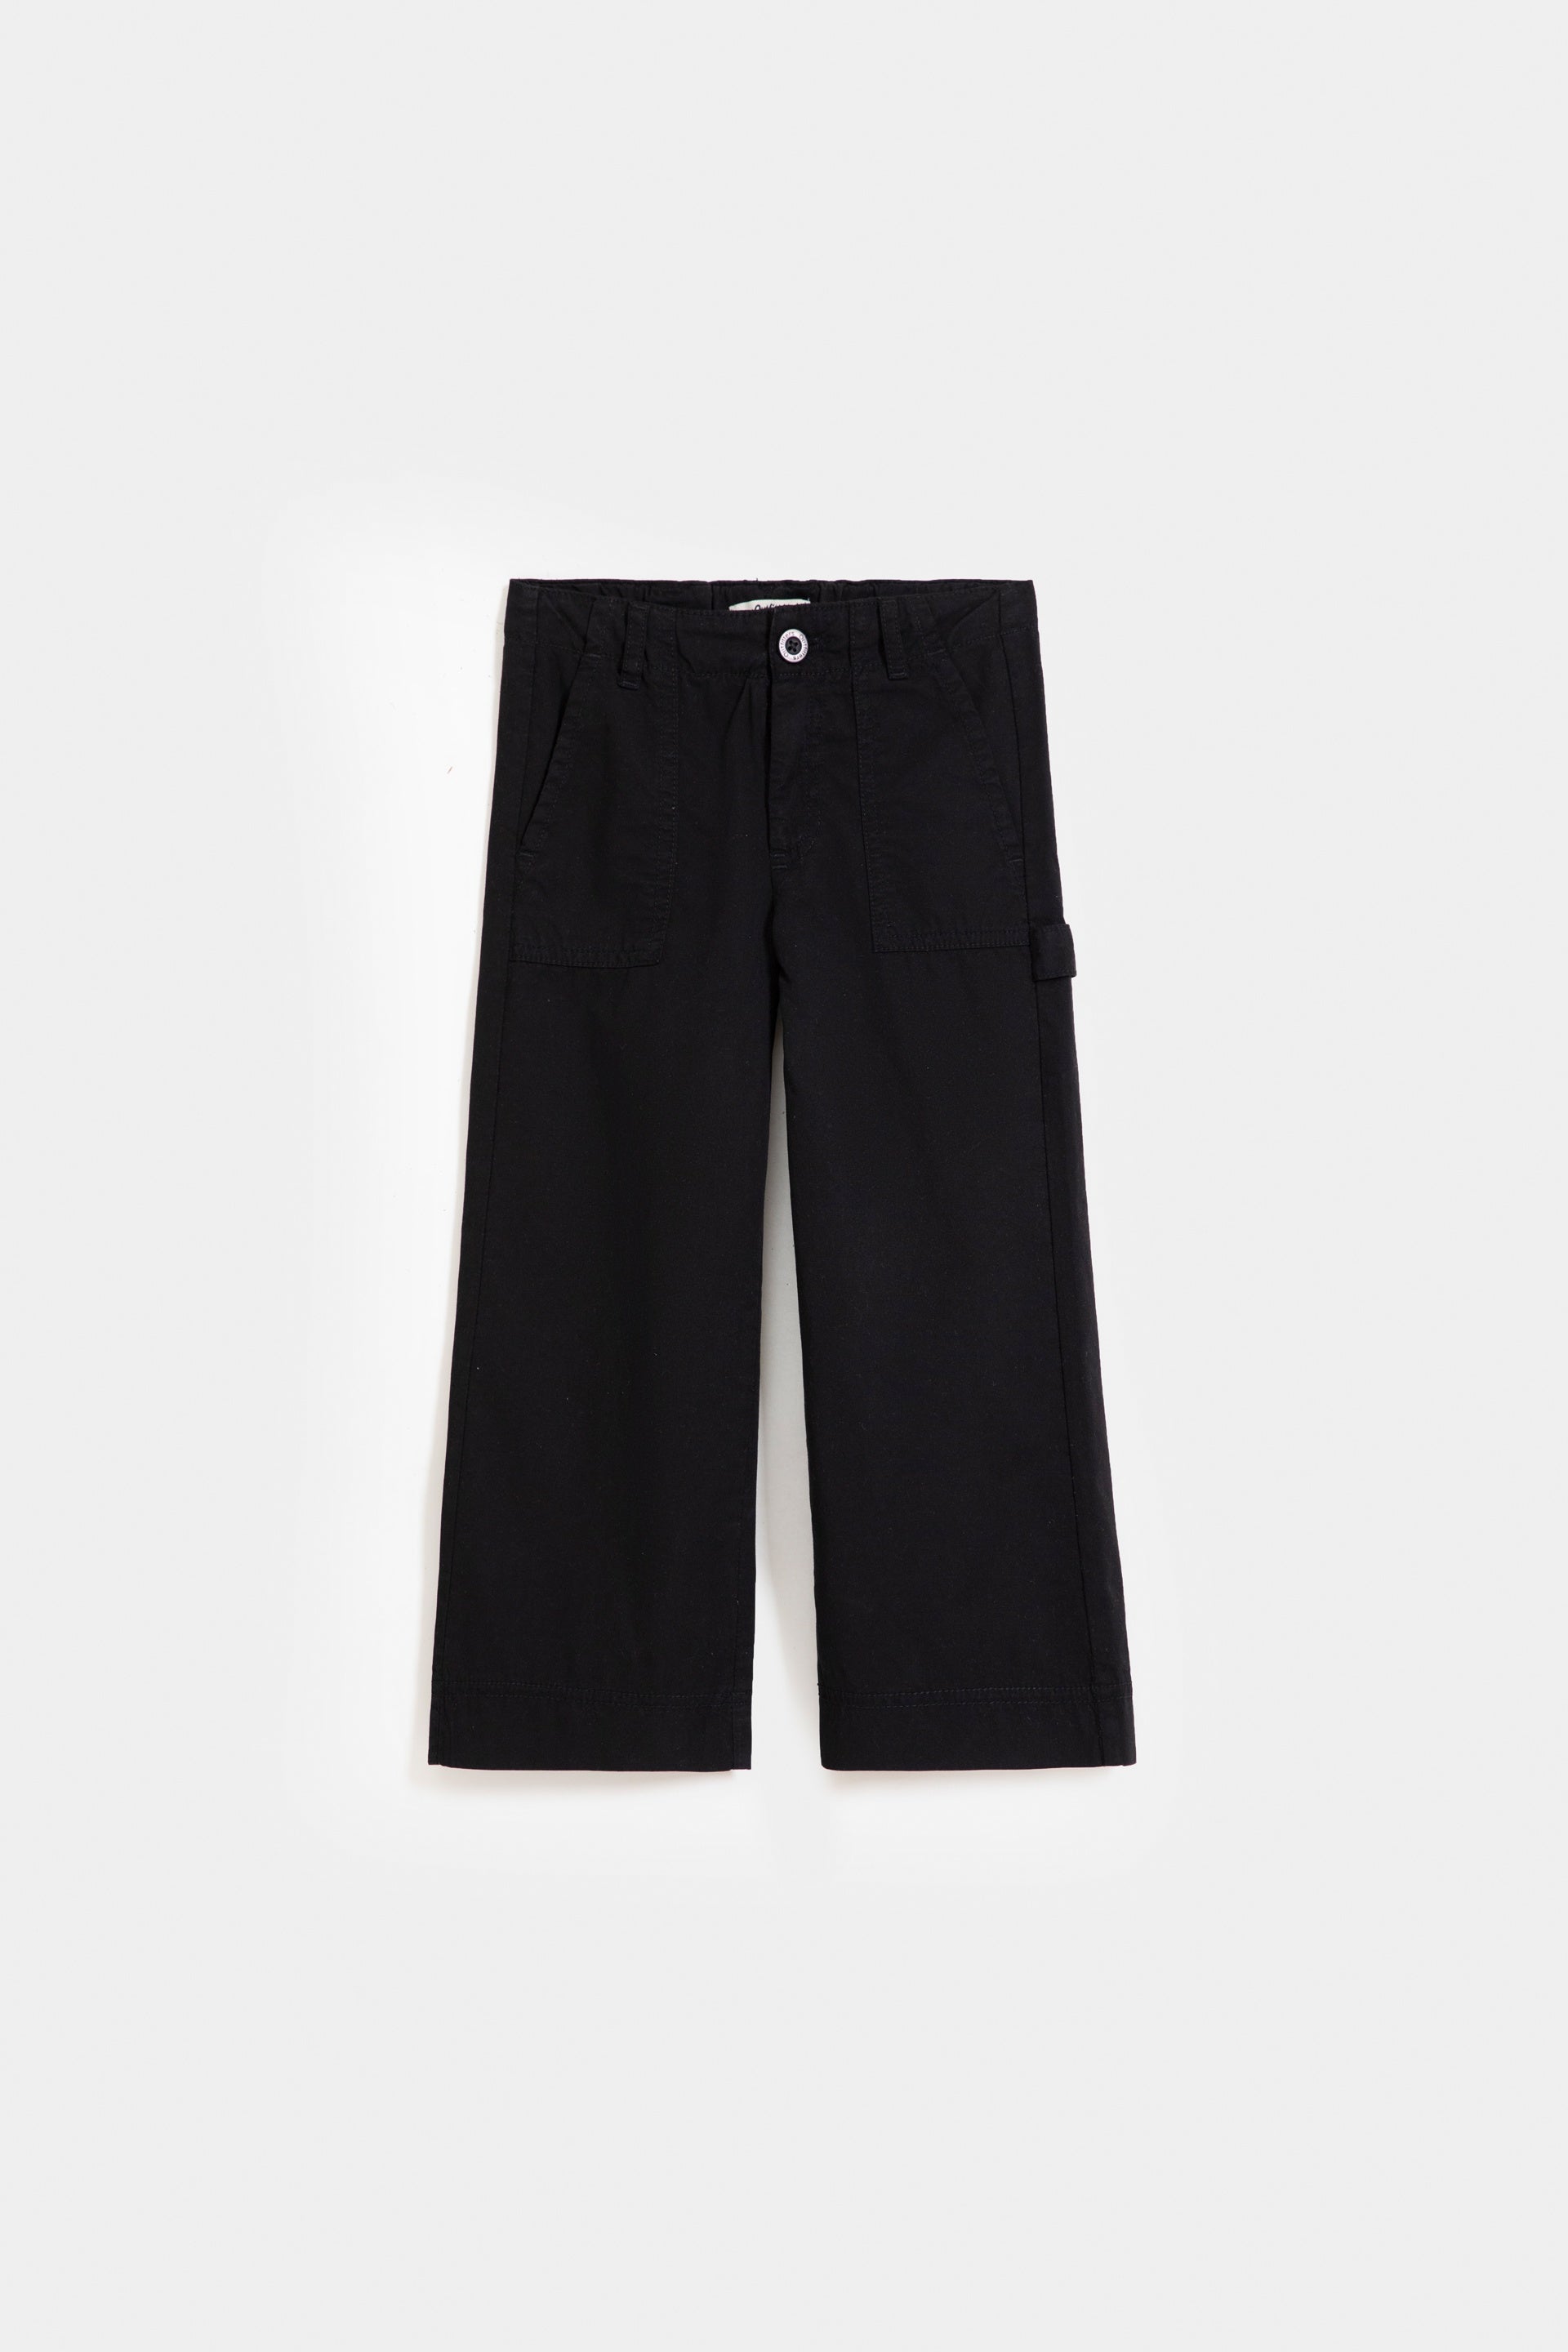 BAD BOY OUTFITTERS BY KFC (DARK BLUE & BEIGE) TROUSERS